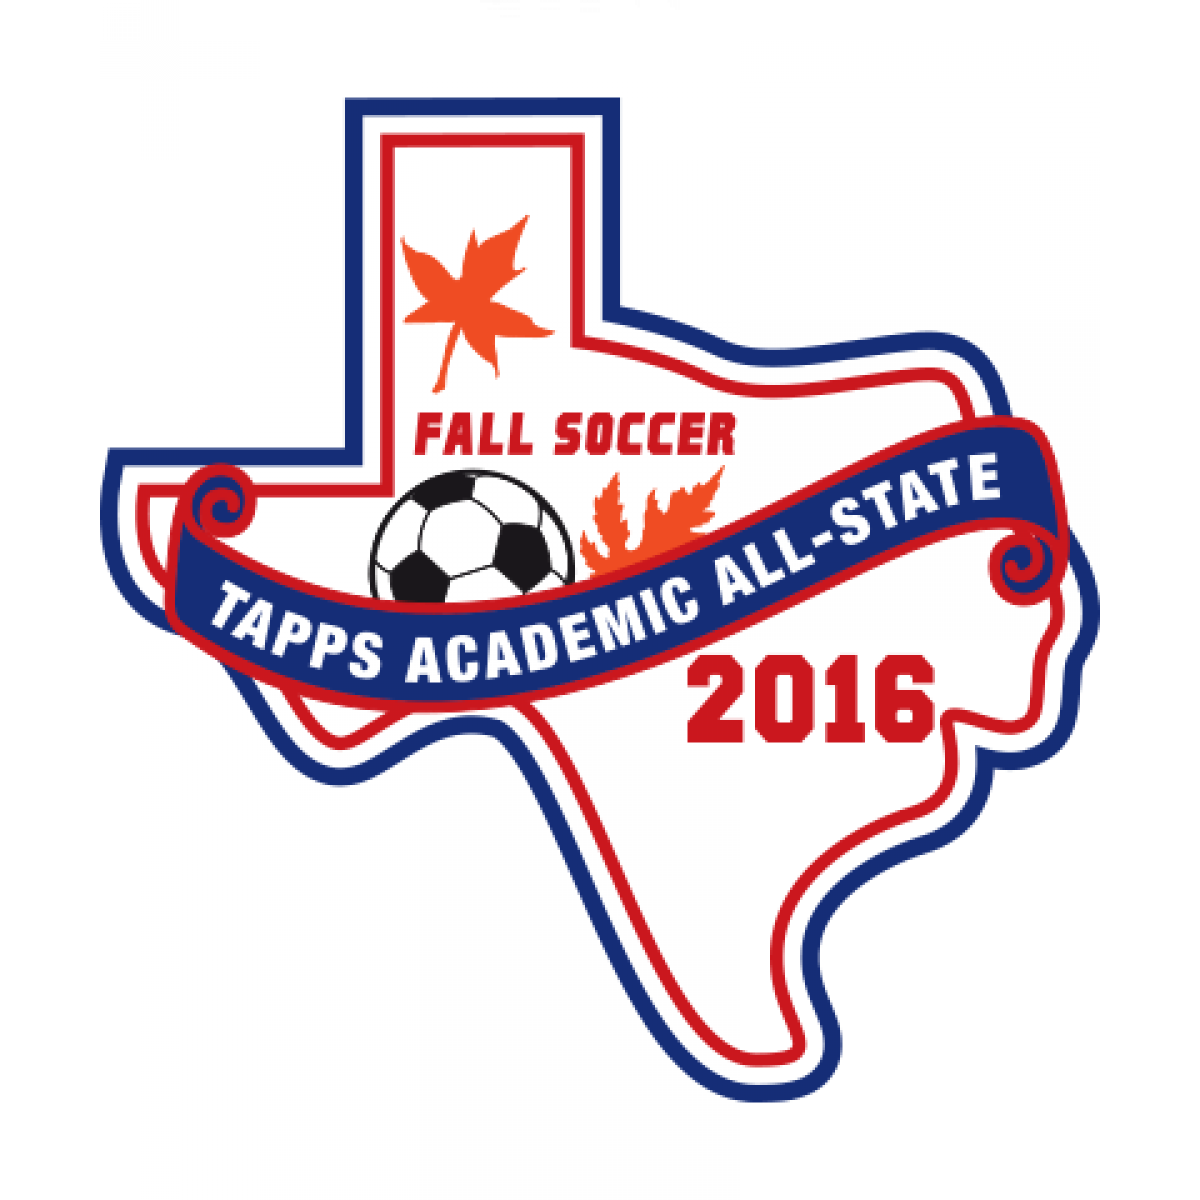 Felt TAPPS 2016 Soccer (Fall)  Academic All-State Patch